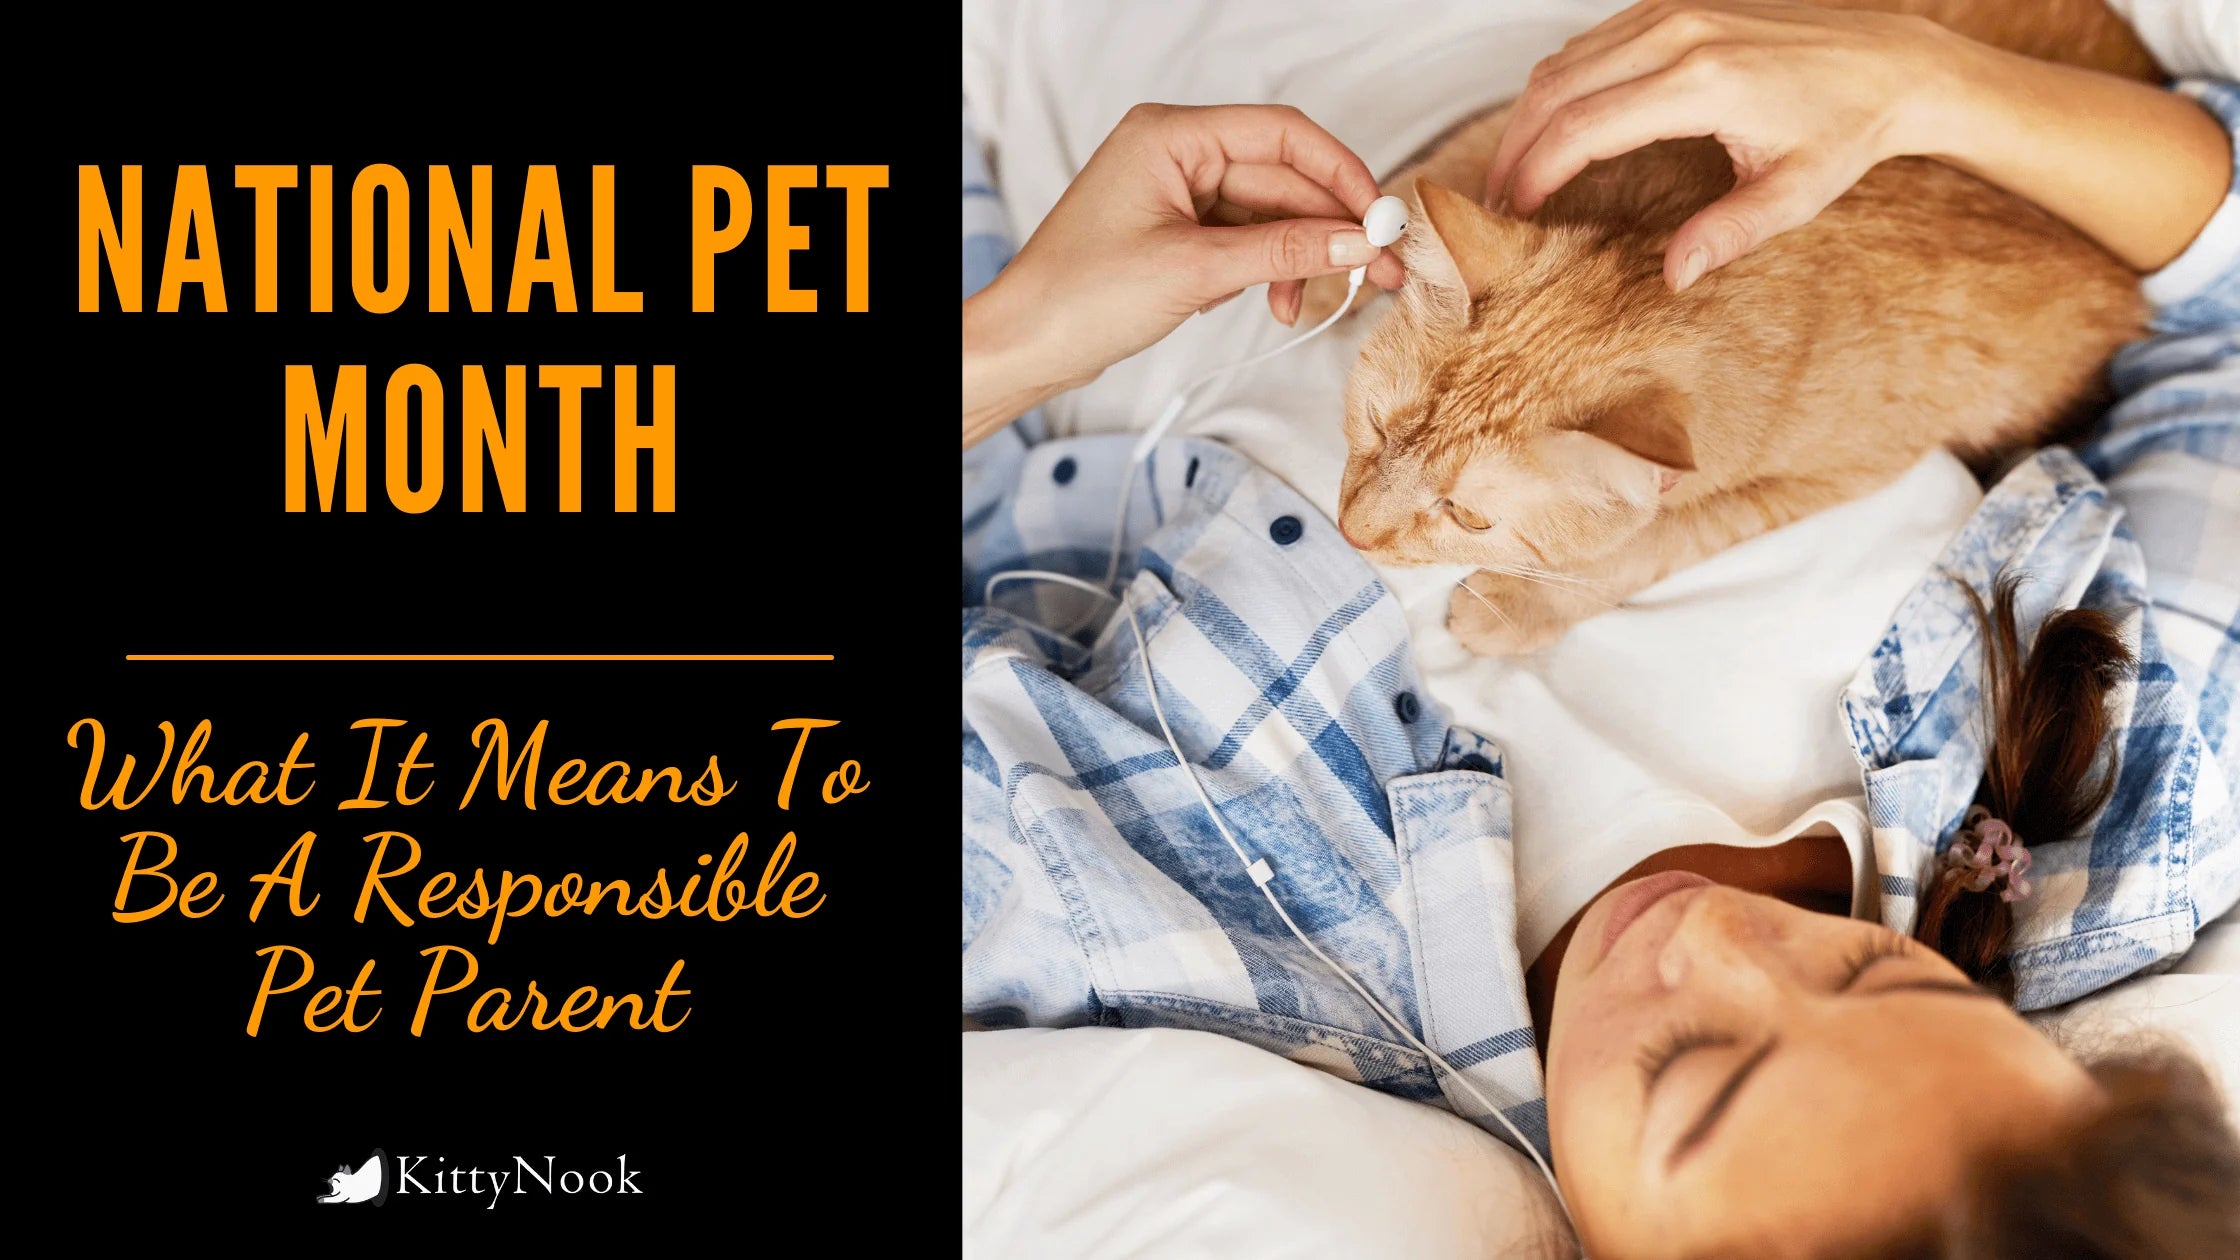 National Pet Month: What It Means To Be A Responsible Pet Parent - KittyNook Cat Company